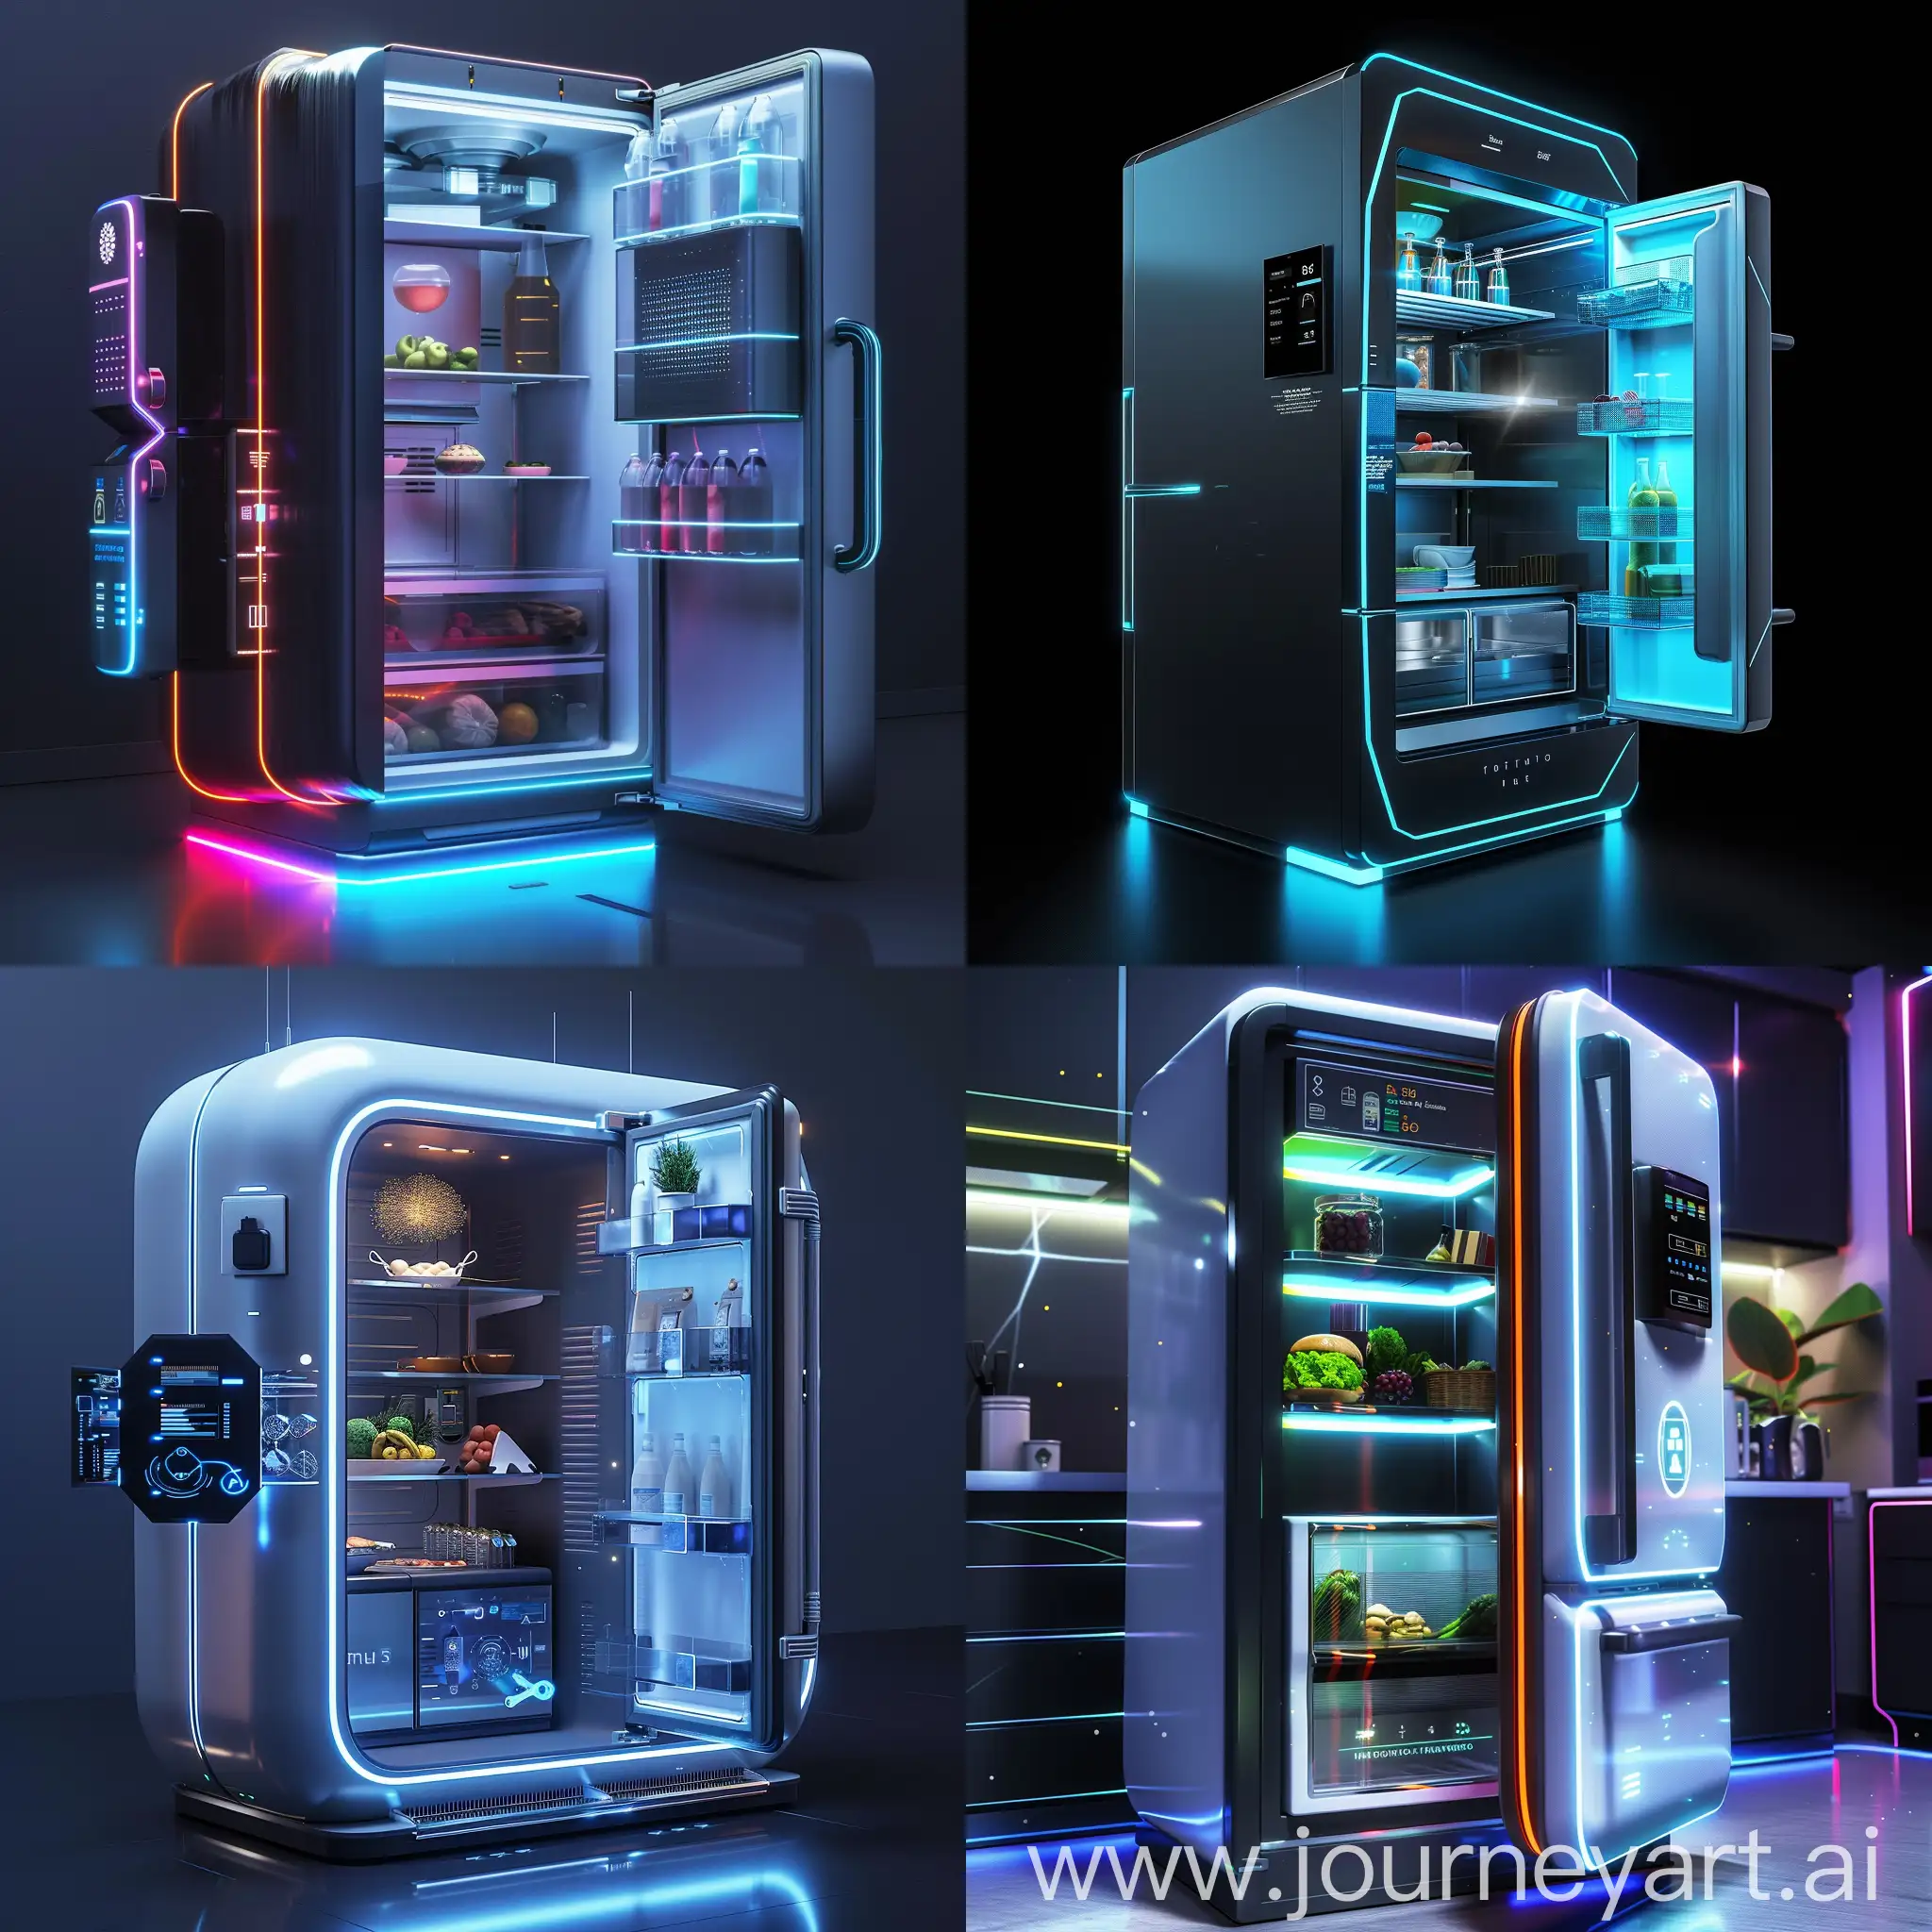 Futuristic-Smart-Fridge-with-Interactive-Display-and-SelfSterilizing-Surfaces